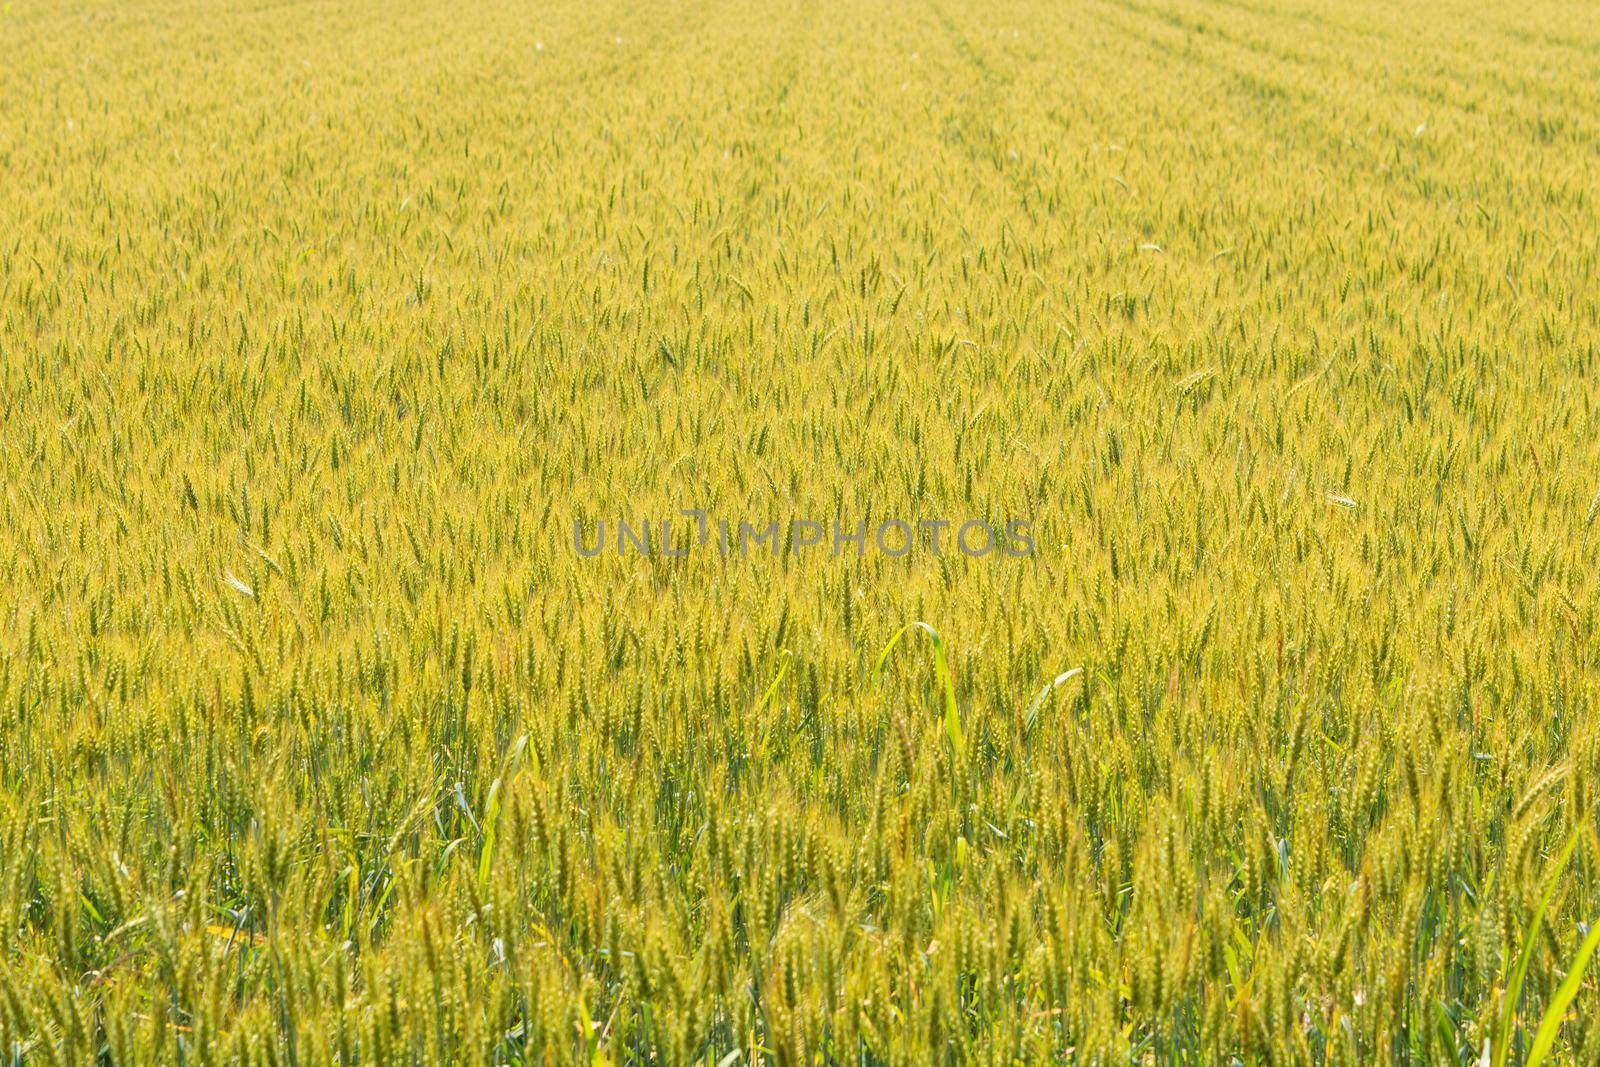 Expanse of wheat in a field under the spring sun by brambillasimone